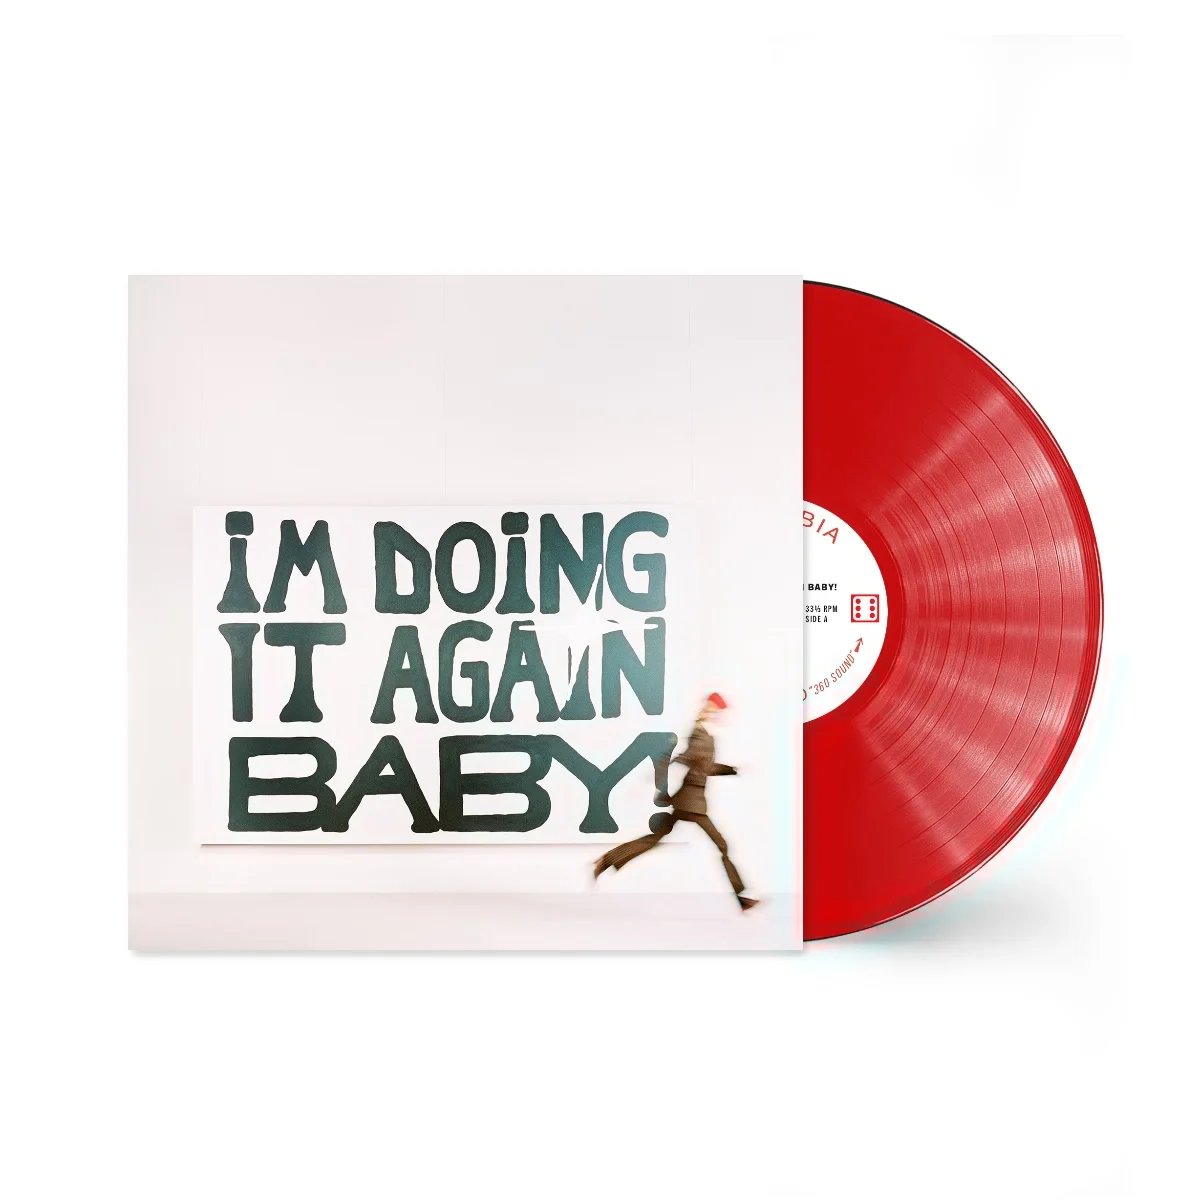 JUST IN! 'I'm Doing it Again Baby!' by Girl In Red The second album from the popular Norwegian indie pop force is in - on translucent red vinyl of course. @girlindred normanrecords.com/records/201762…